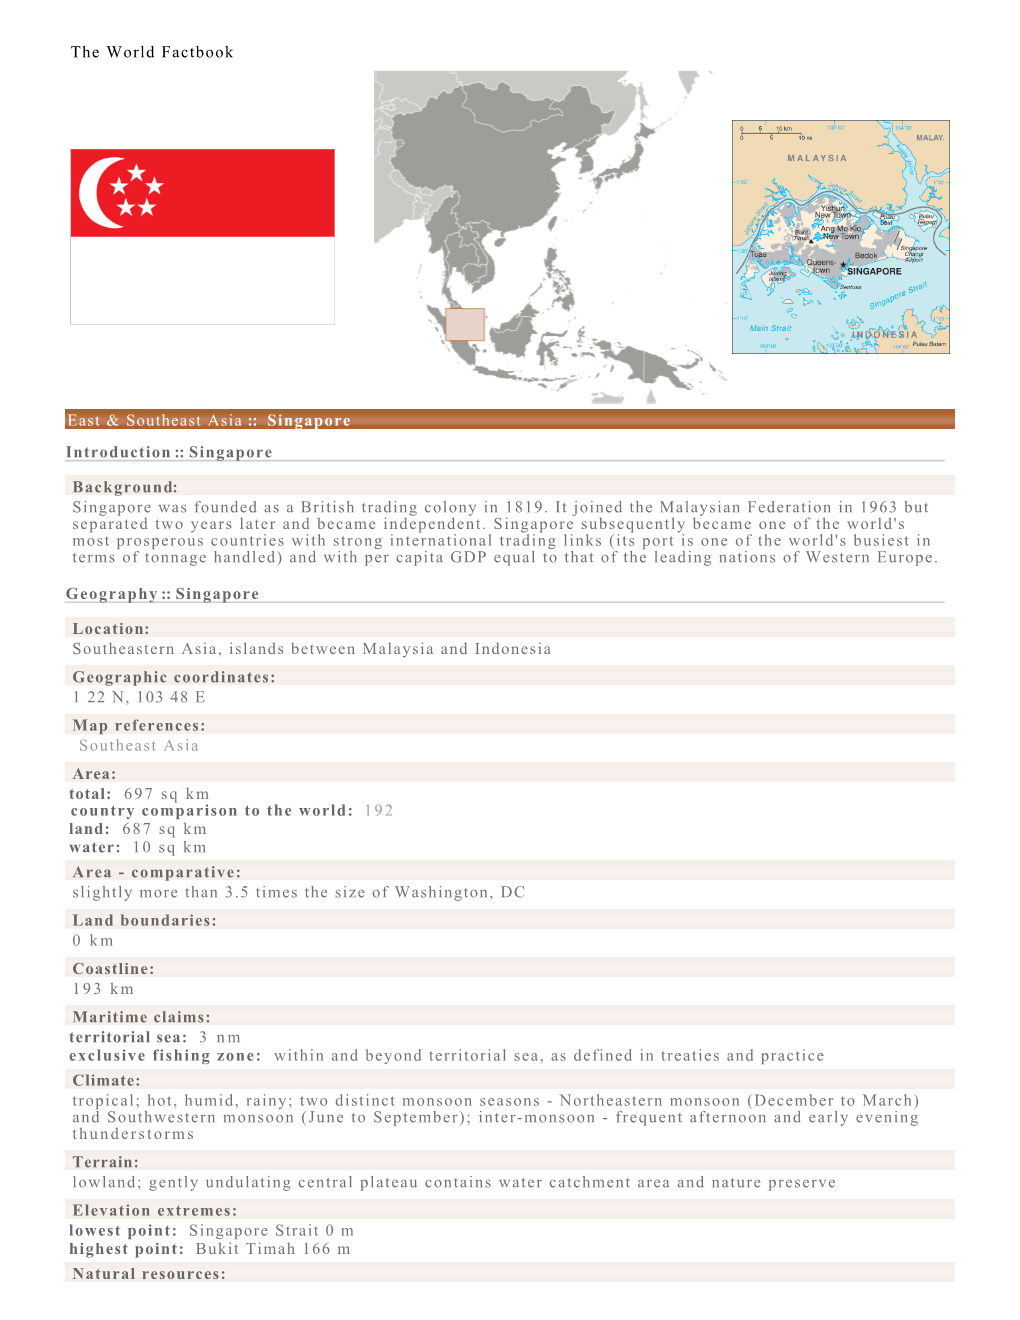 The World Factbook East & Southeast Asia :: Singapore Introduction